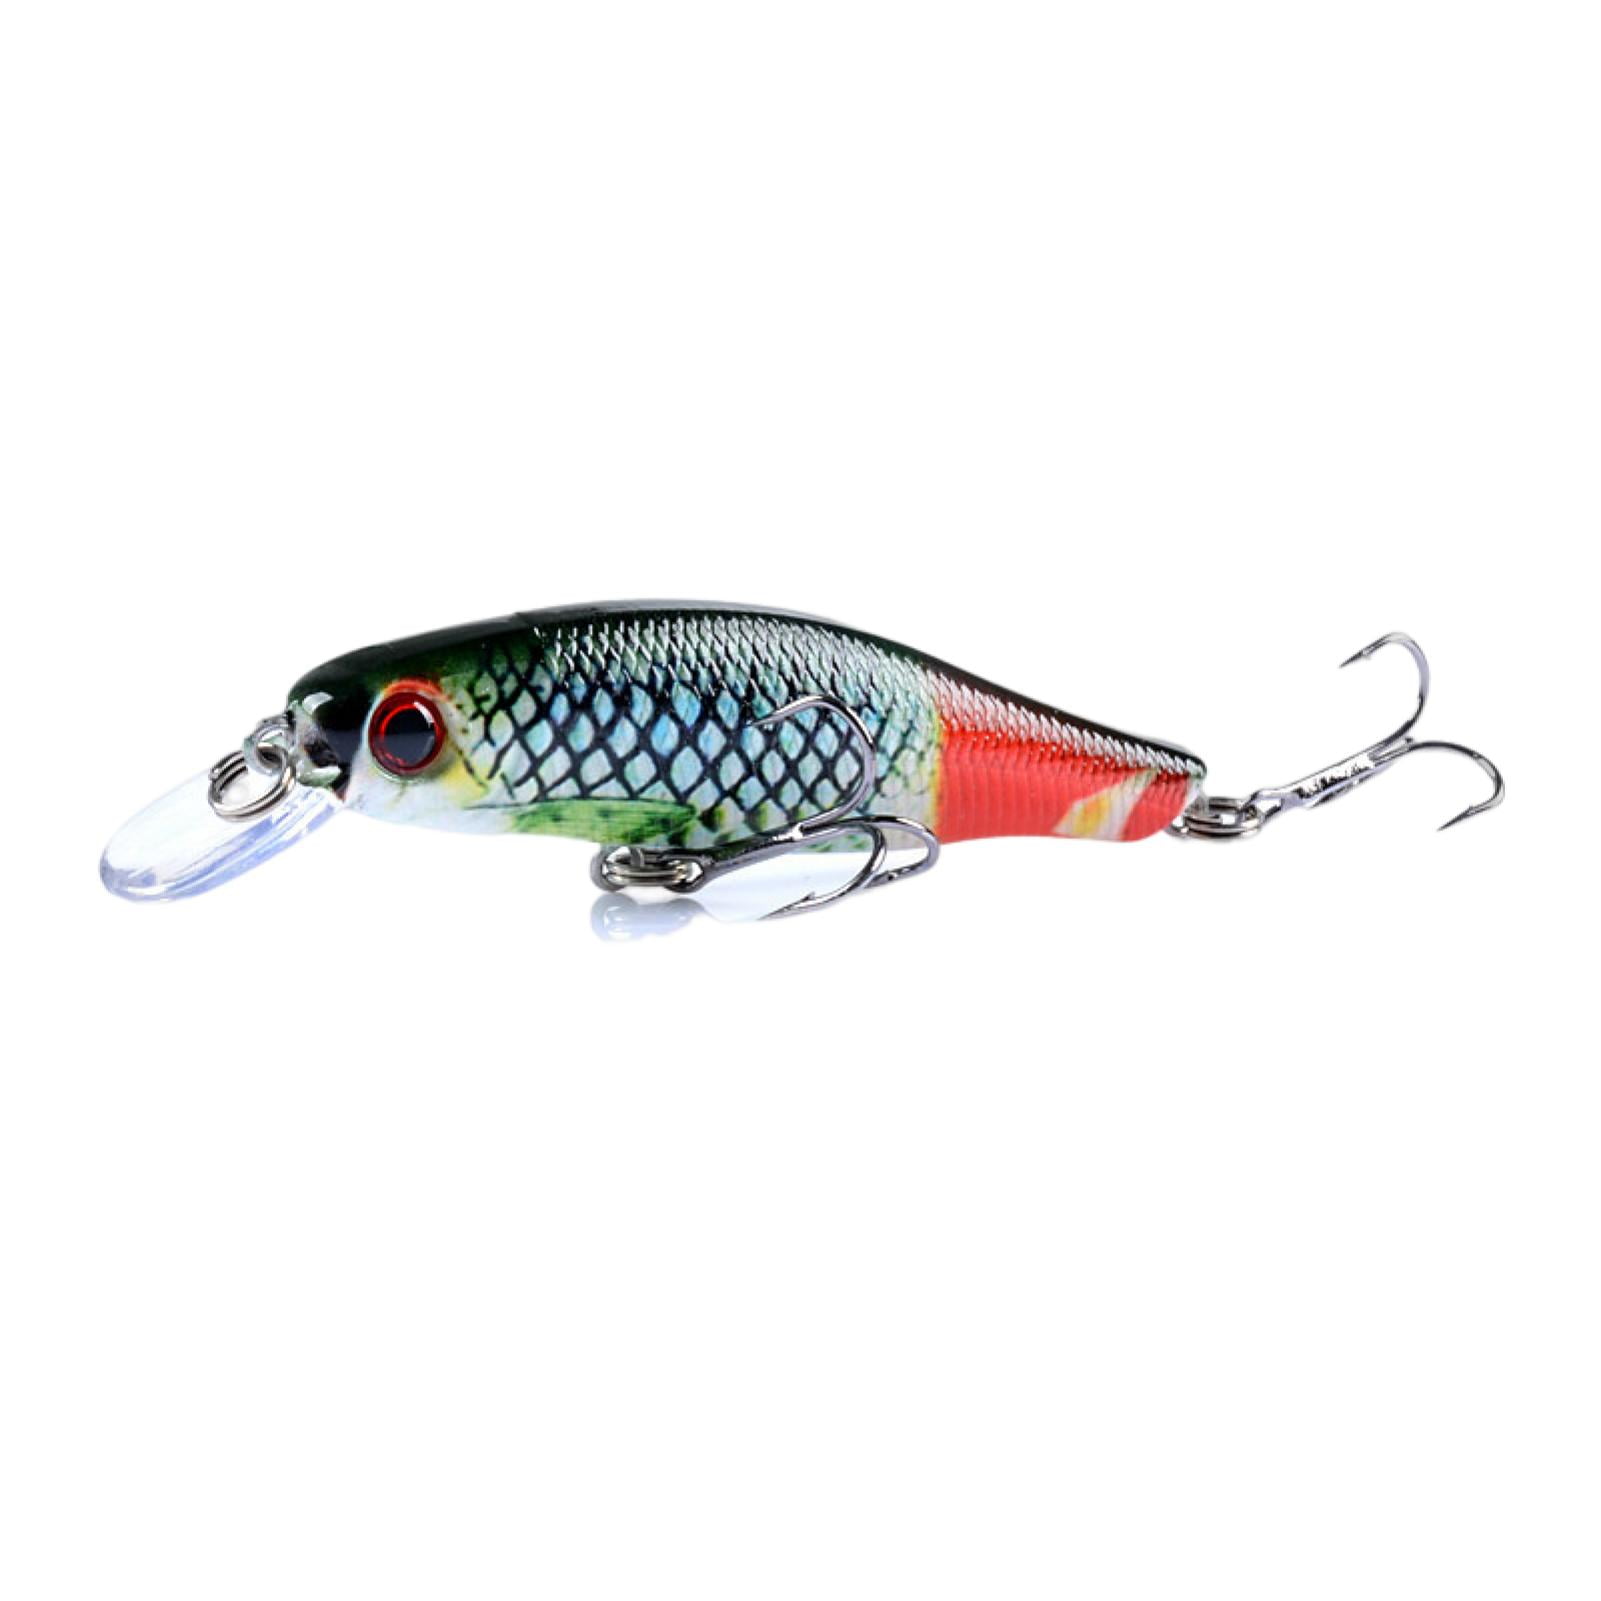 UDIYO 8.5cm/8.7g Bionic Bait Vibrant Color Realistic Looking 3D Eyes Design  with Treble Hook Smooth Increase Fishing Rate Colorful Artificial Vivid